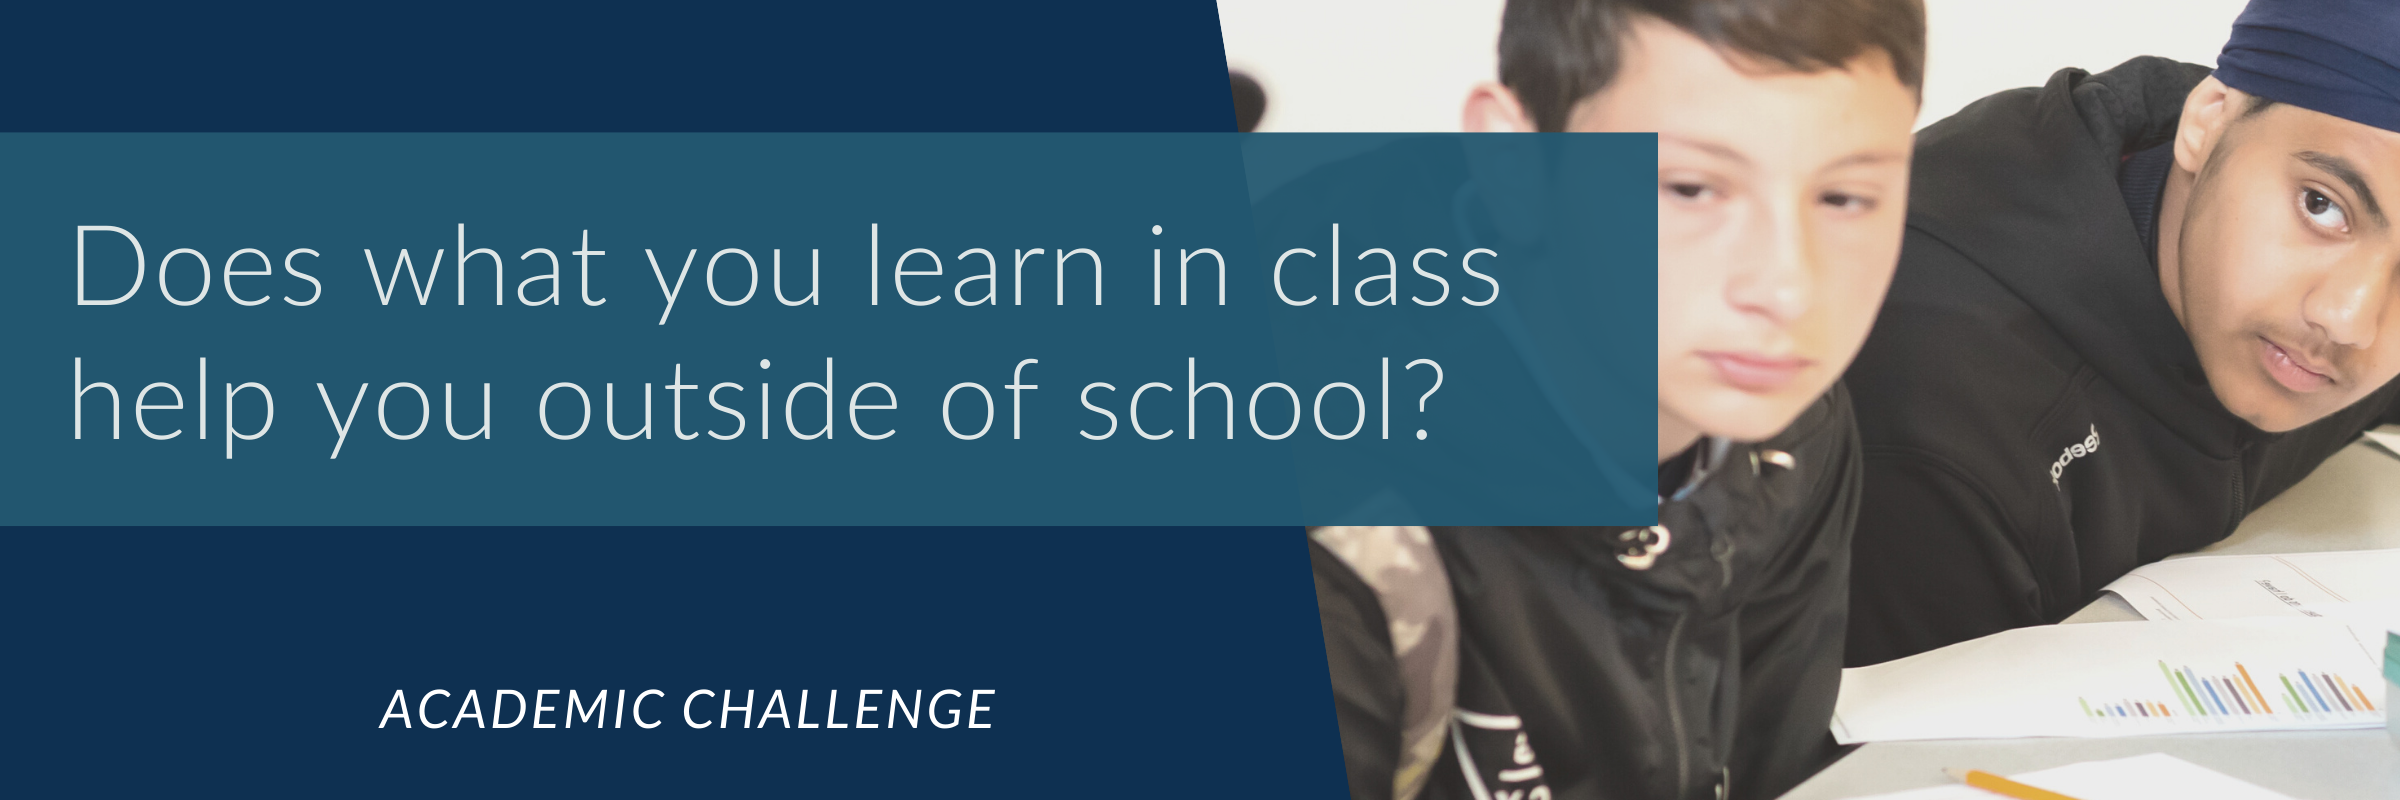 Does what you learn in class help you outside of school?